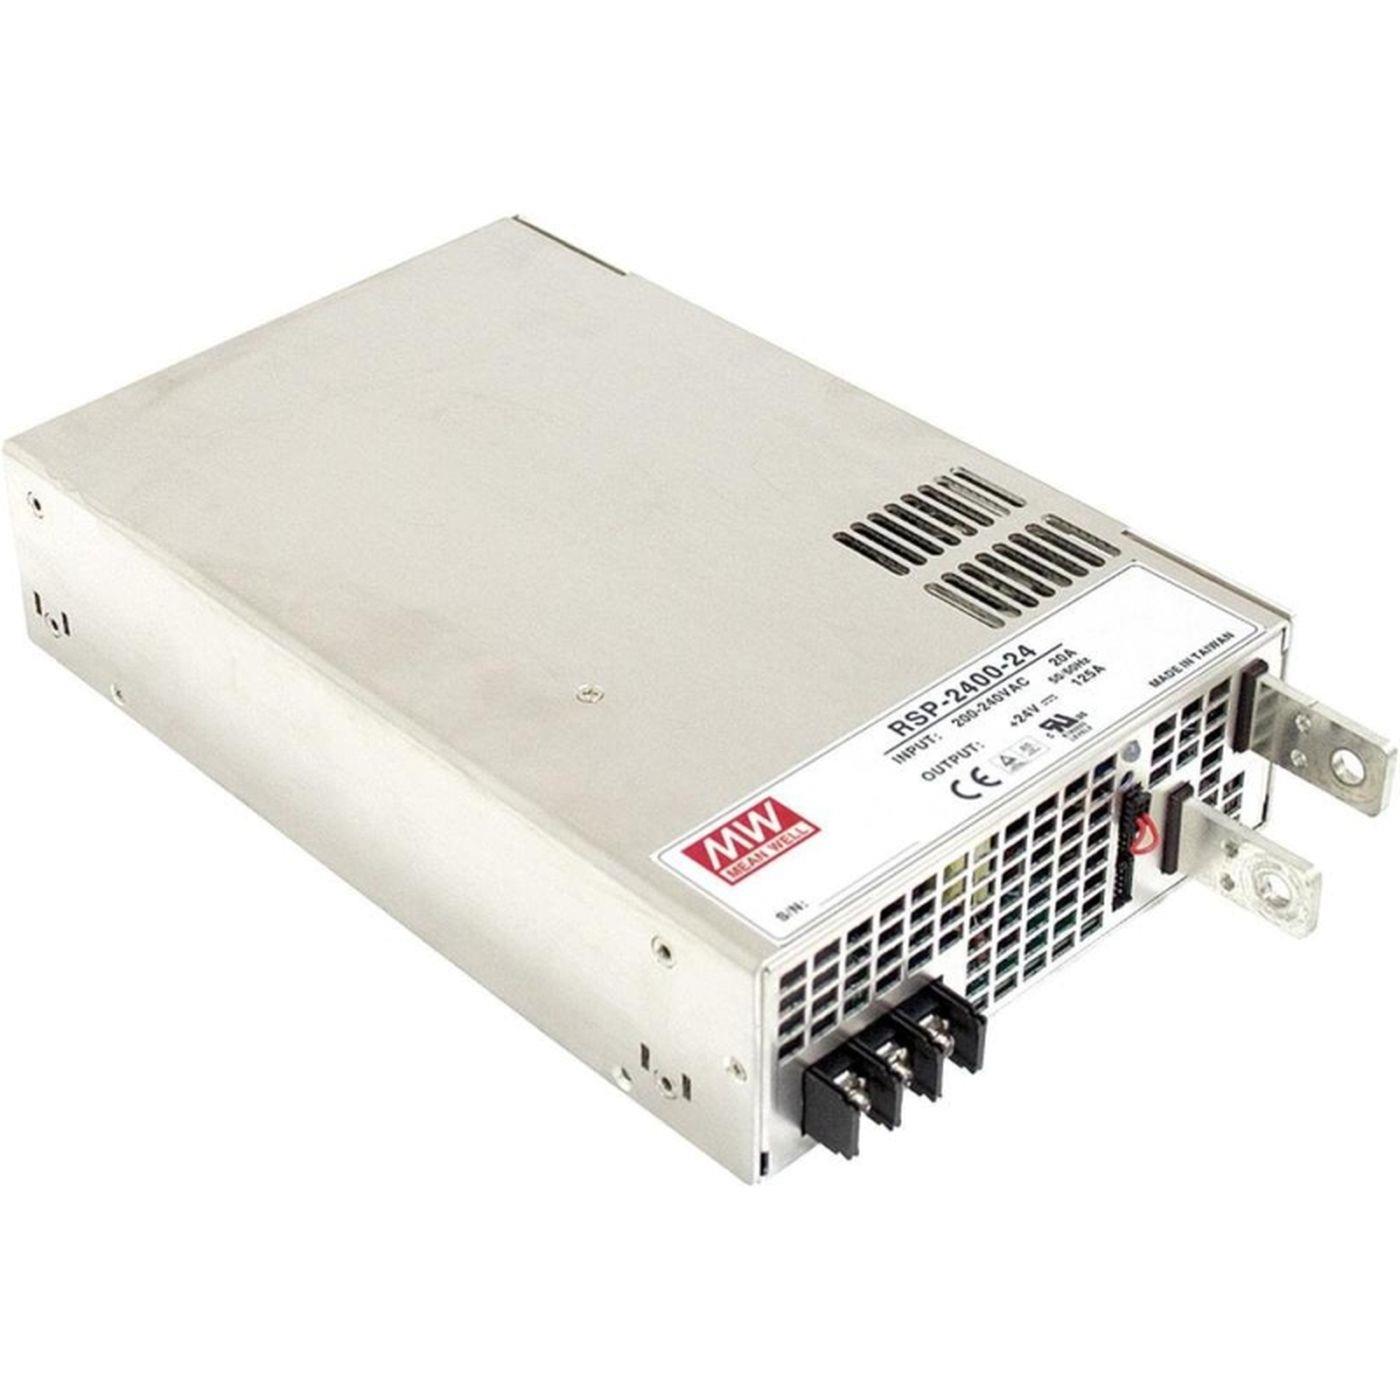 RSP-3000-12 2400W 12V 200A Industrial power supply